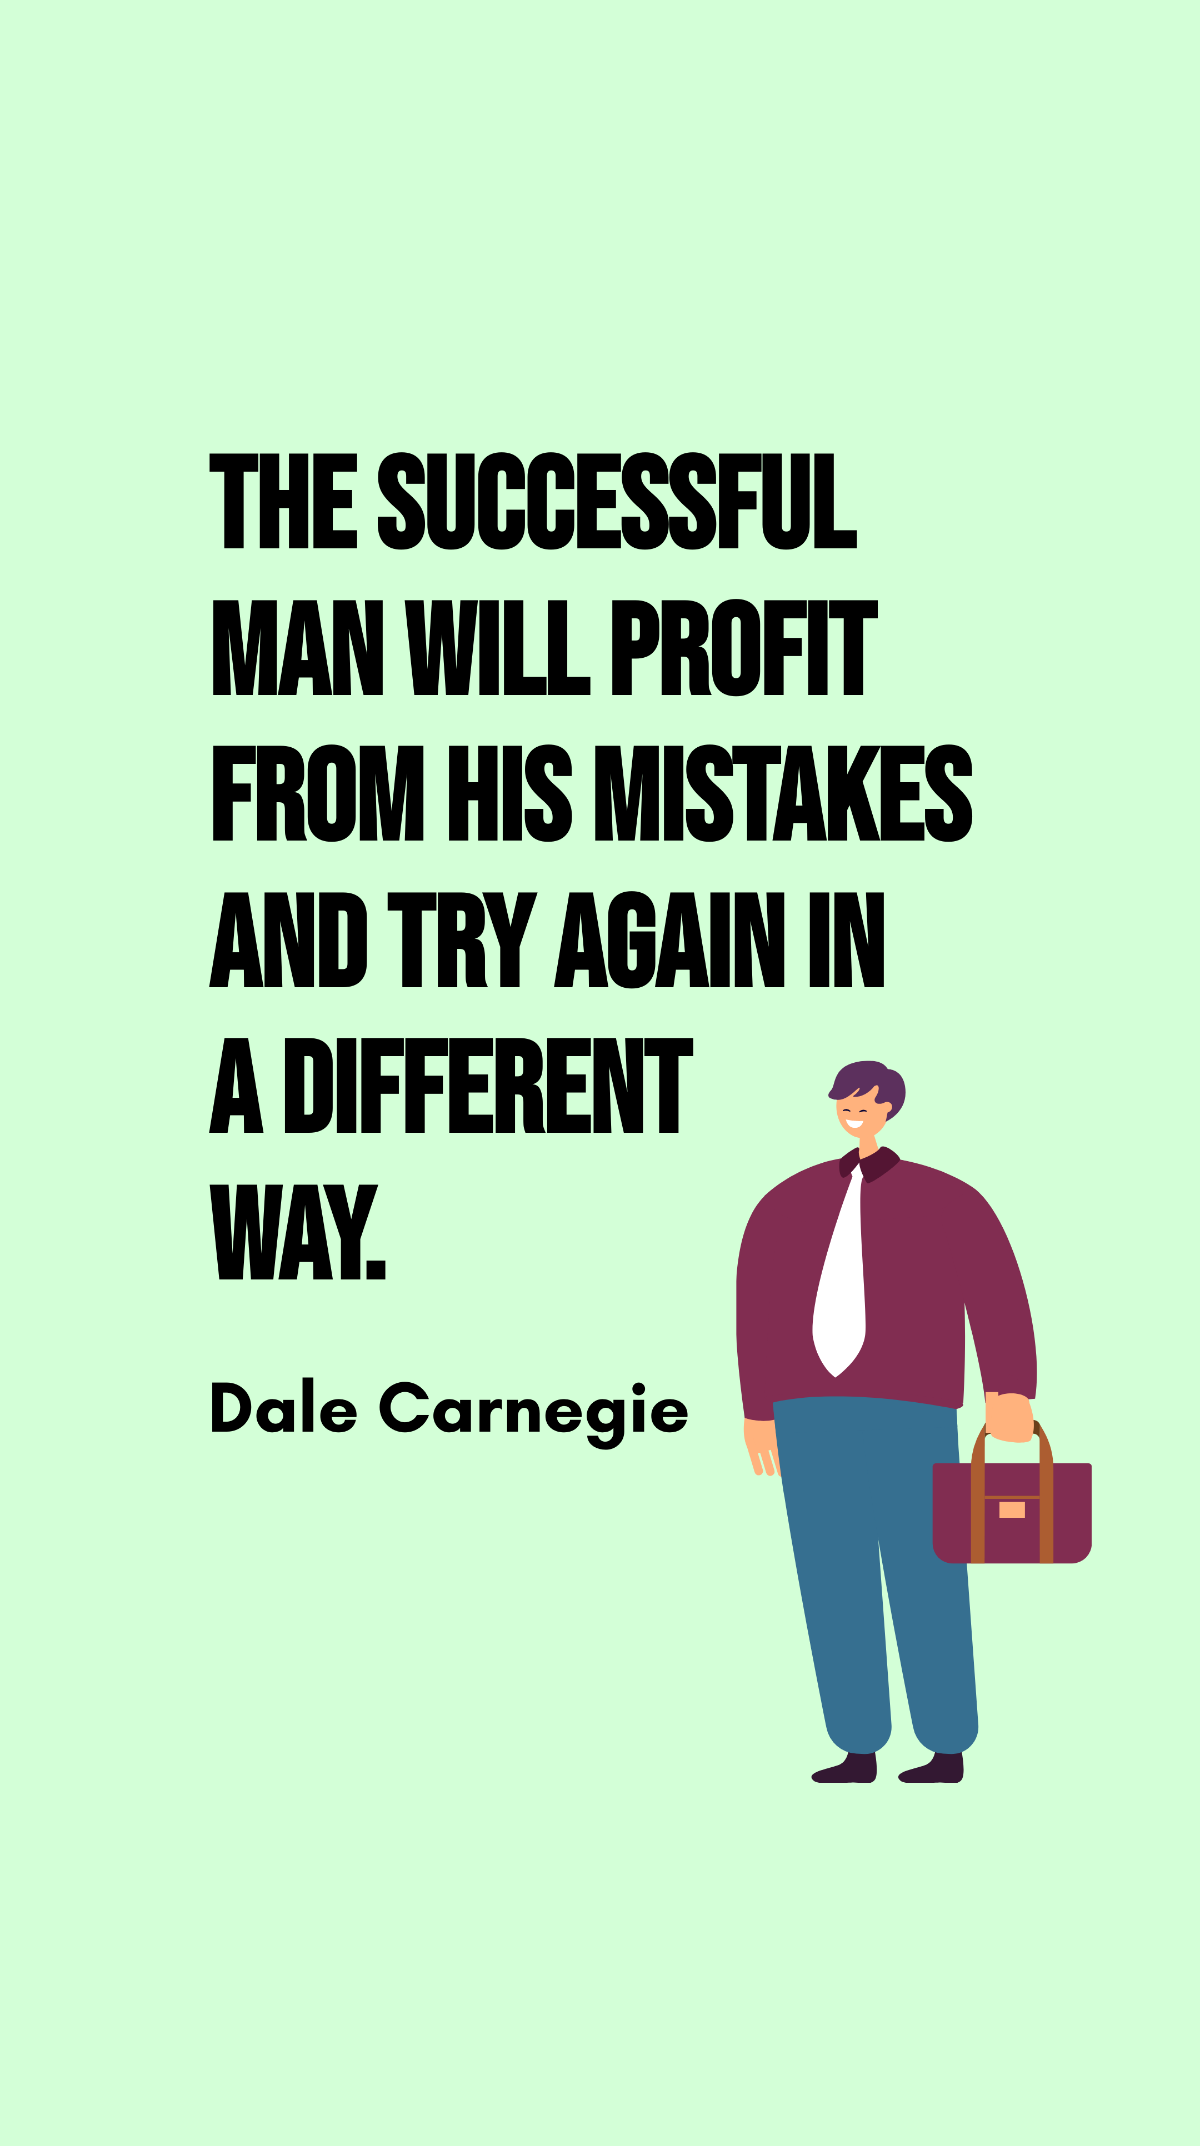 Dale Carnegie - The successful man will profit from his mistakes and try again in a different way.